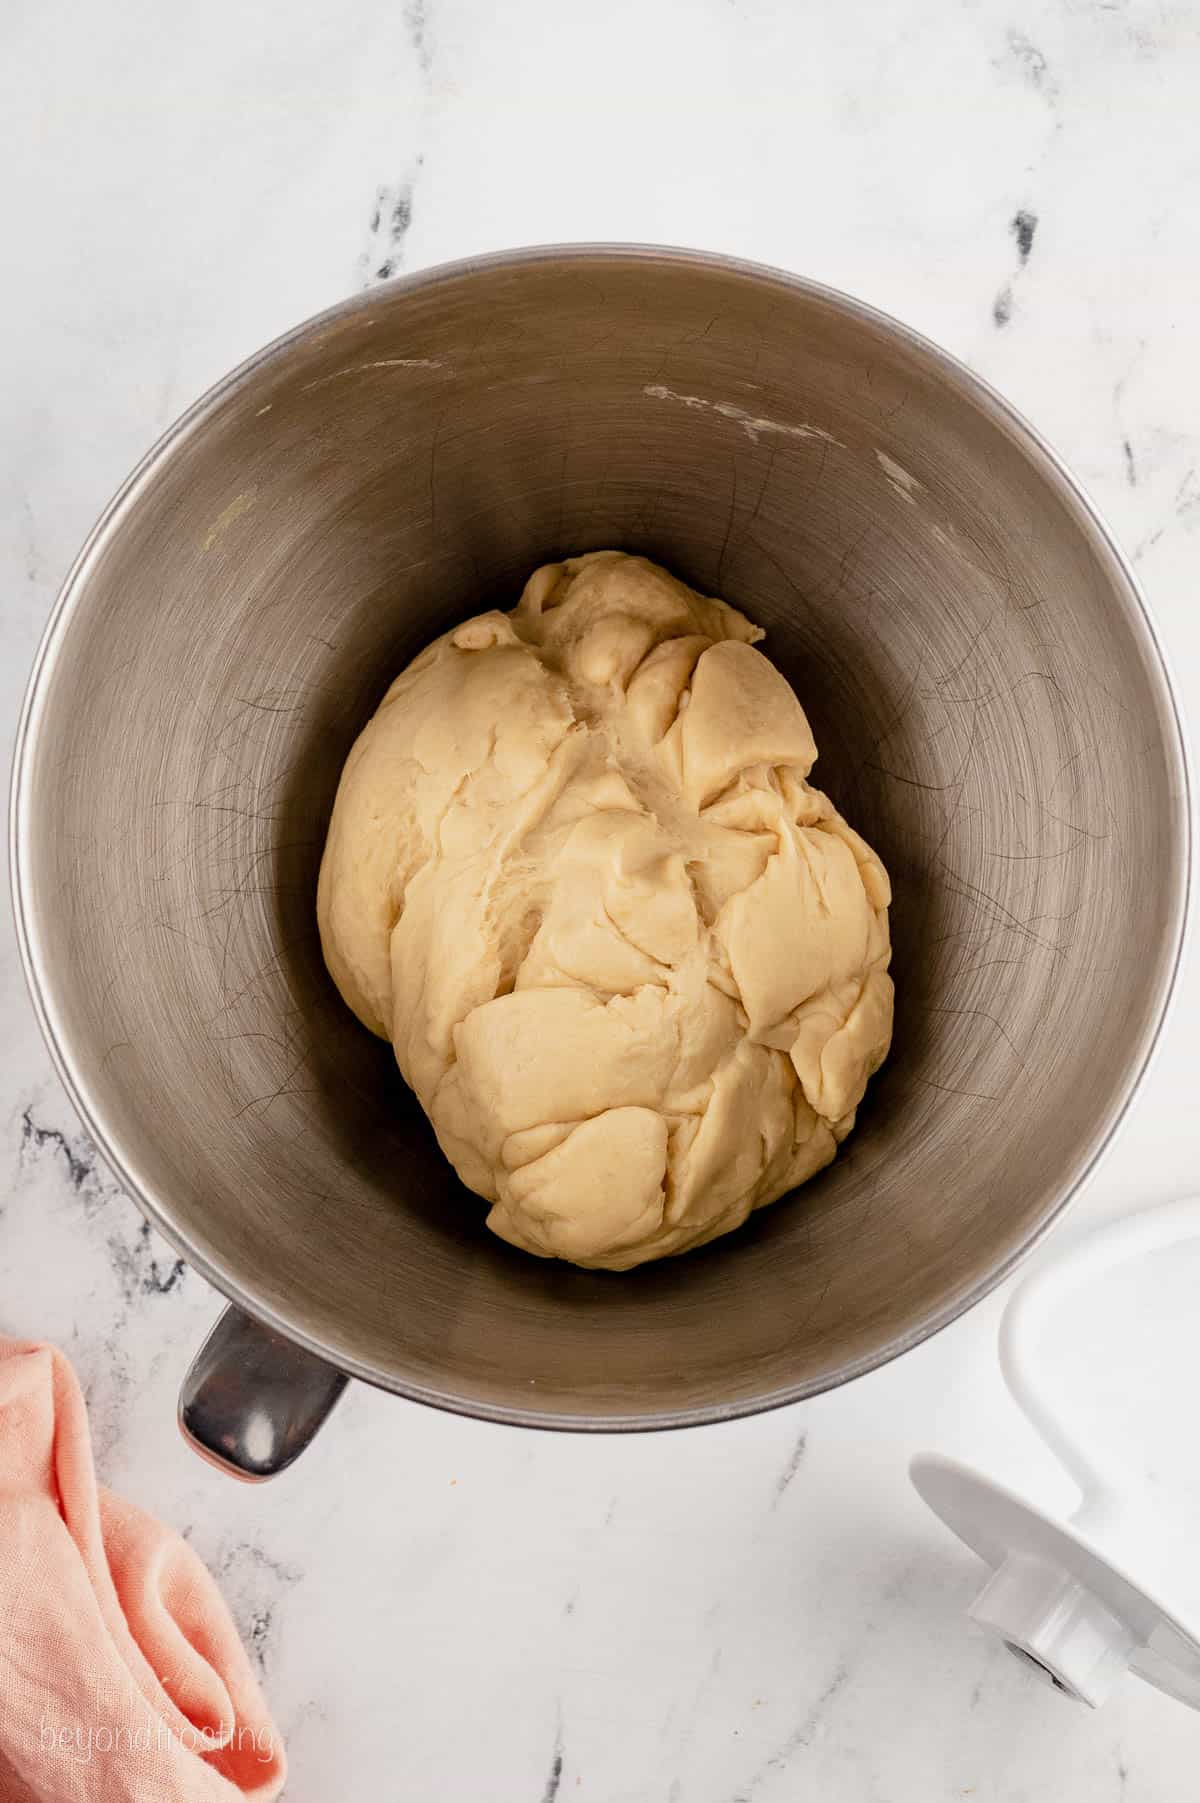 The dough for dinner rolls in a ball inside a mixing bowl.